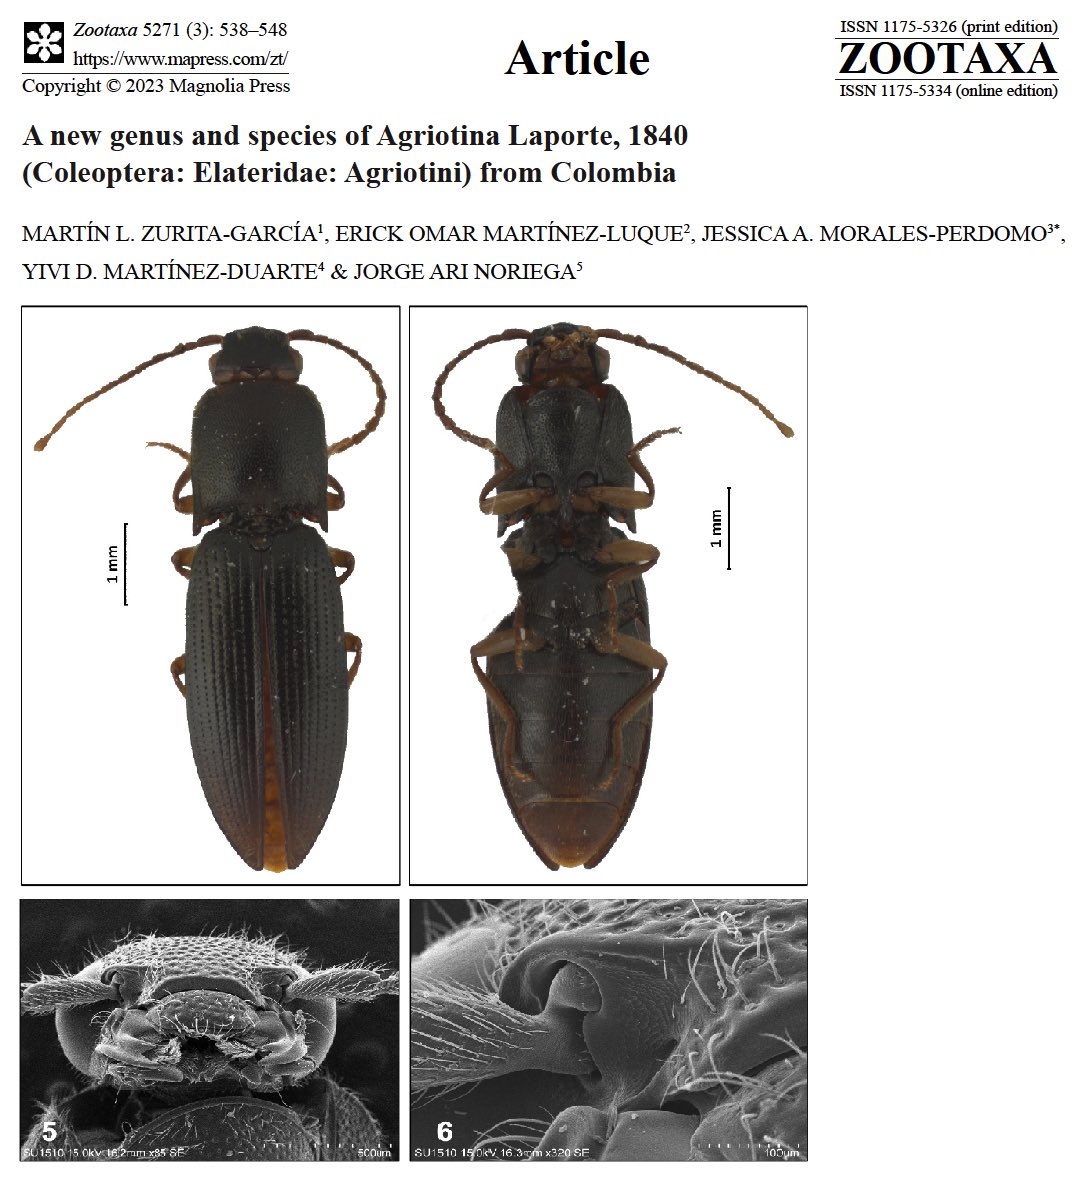 NEW PAPER!!! New genus and new species of Elateridae from Colombia! @Zootaxa @ColeopSoc #Biodiversidad #Colombia